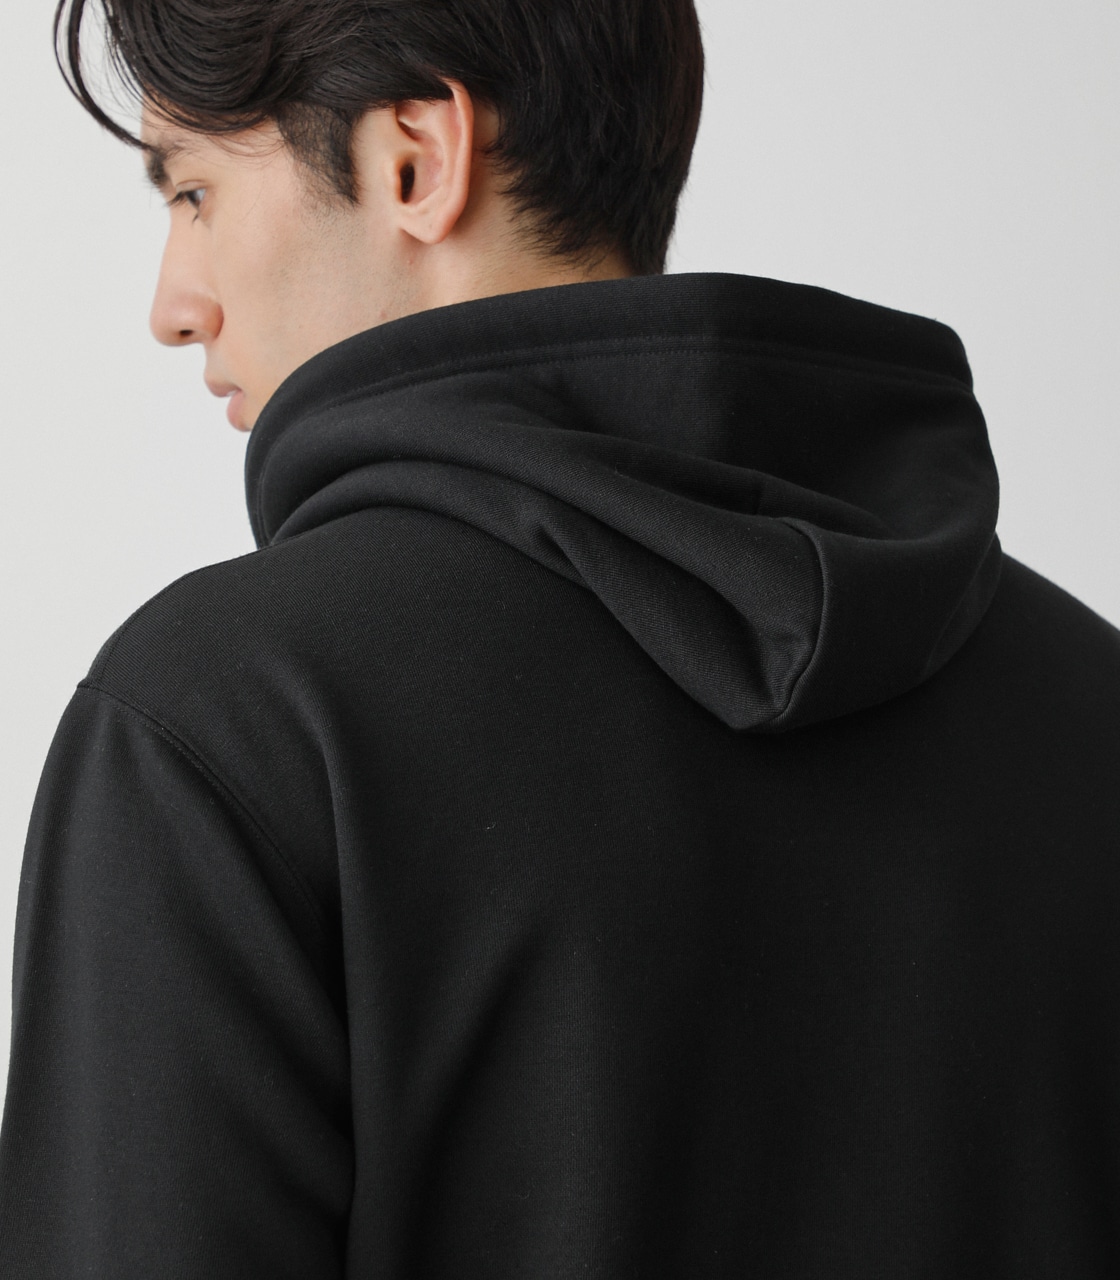 BRUSHED BACK COLOR HOODIE/ブラッシュドバックカラーフーディ 詳細画像 BLK 9